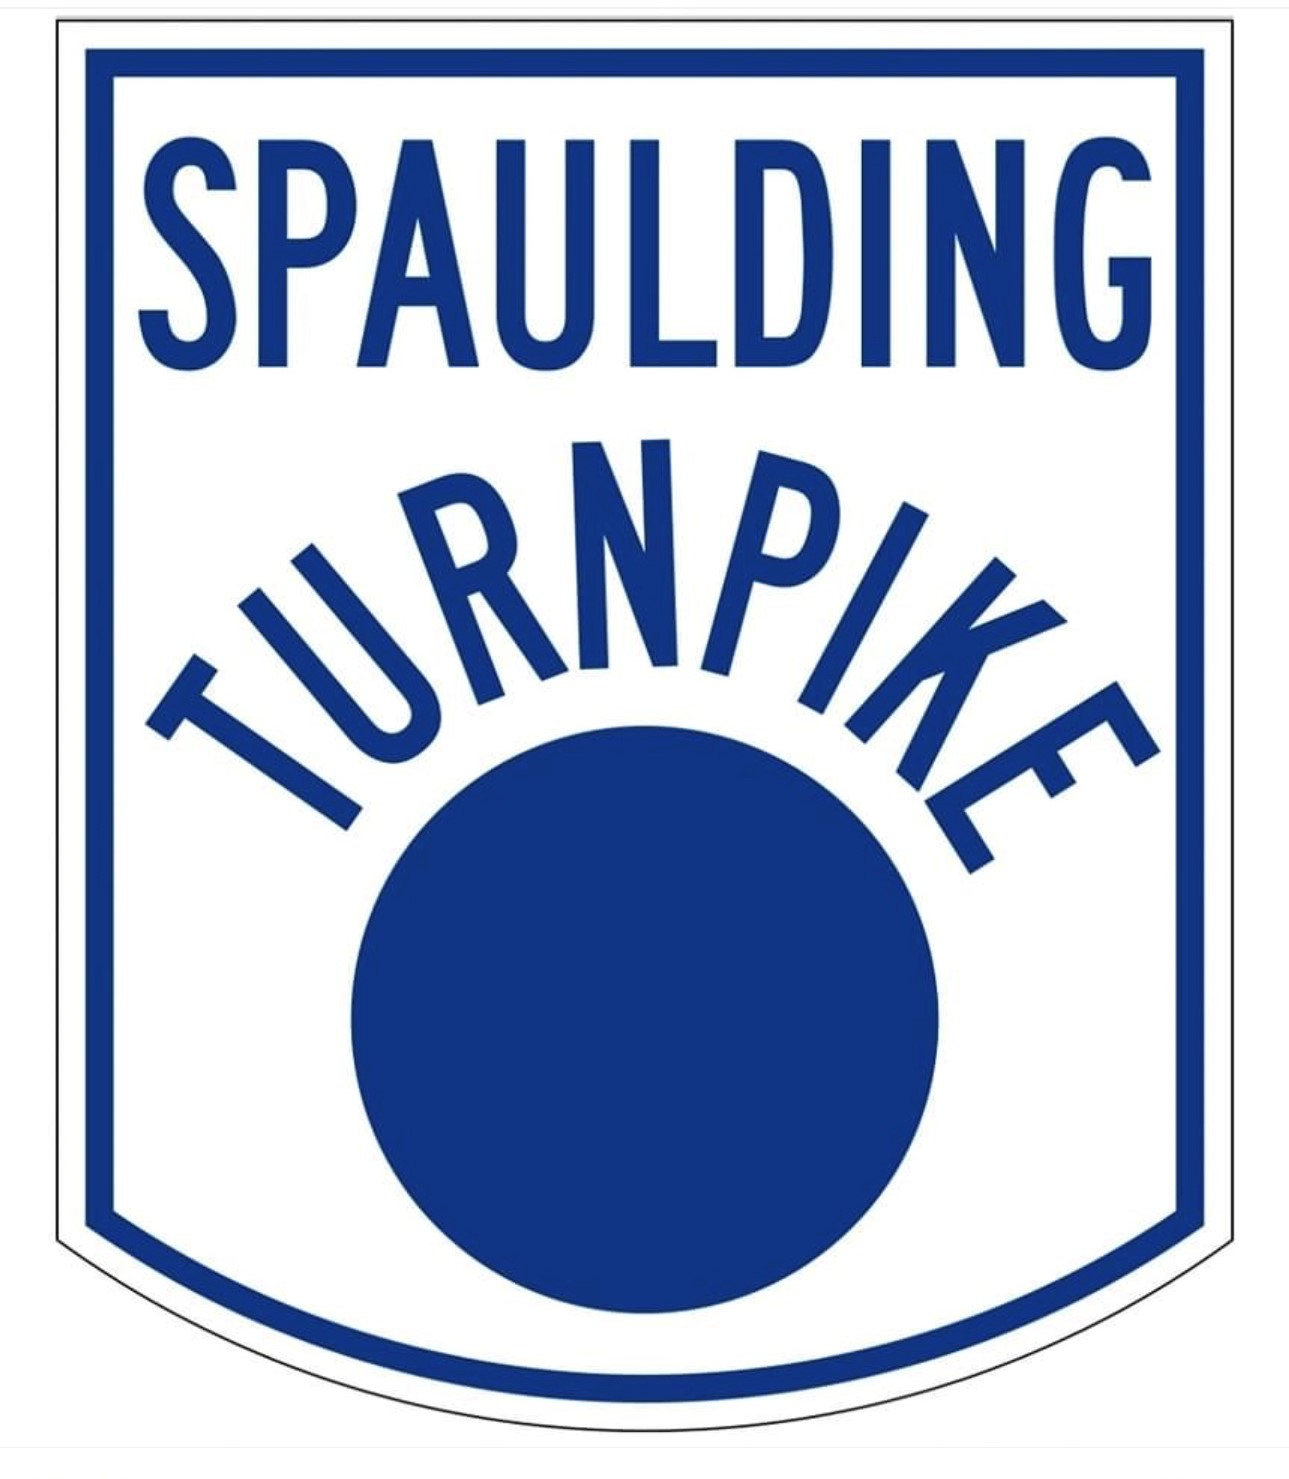 This is the sign for the Spaulding Turnpike. There is a blue border on this sign, which is square at the top and curved at the bottom. It is longer than it is wide. The words Spaulding Turnpike appear at the top of the sign. The word Spaulding is level, and the word Turnpike is arched over a large blue circle. New Hampshire personal injury law firm Attorney Buckley features this sign.